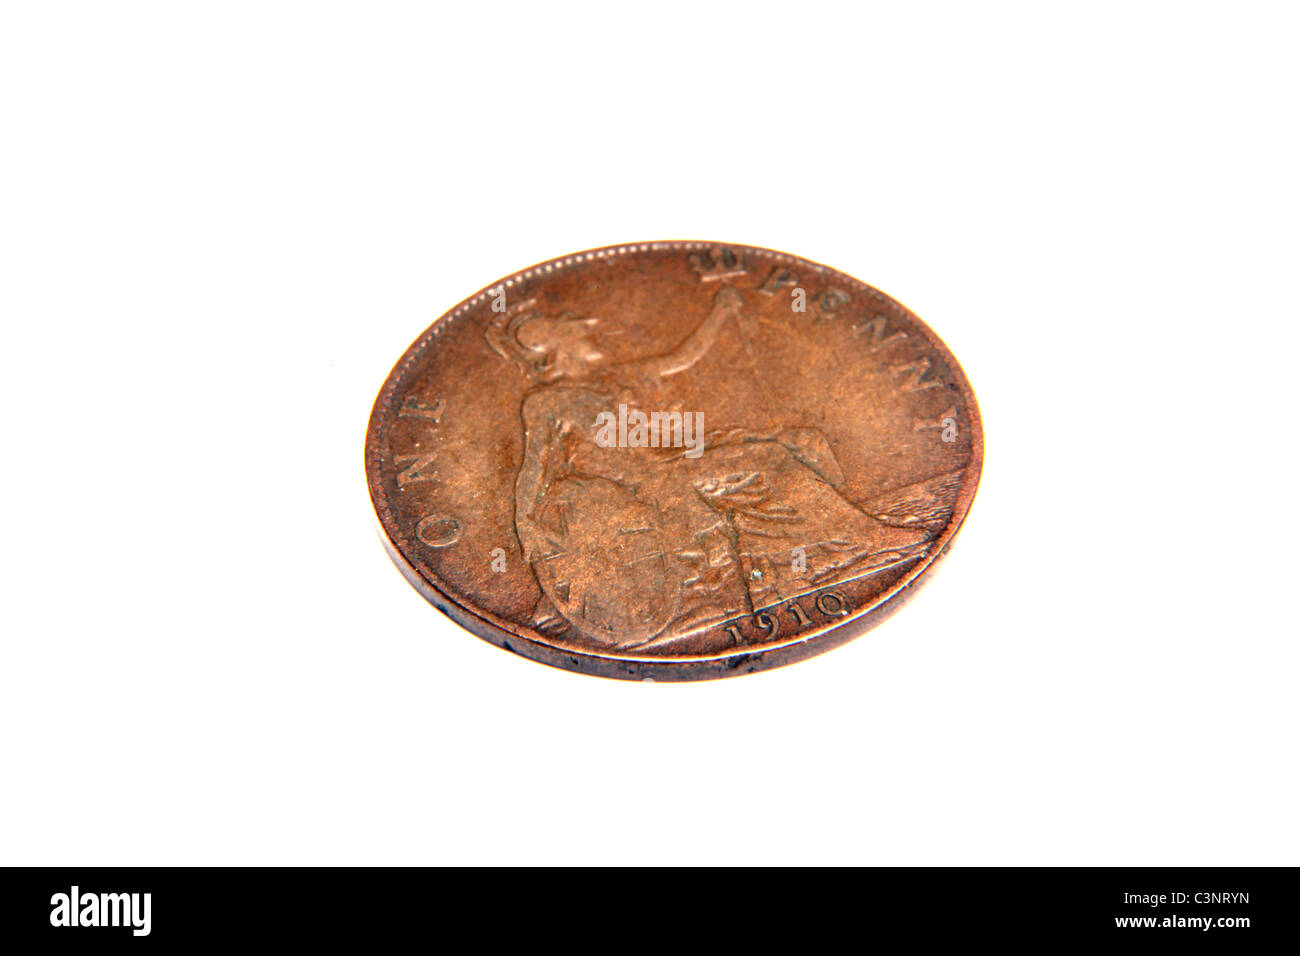 A 1910 old British penny or 1d piece, cut out. Stock Photo